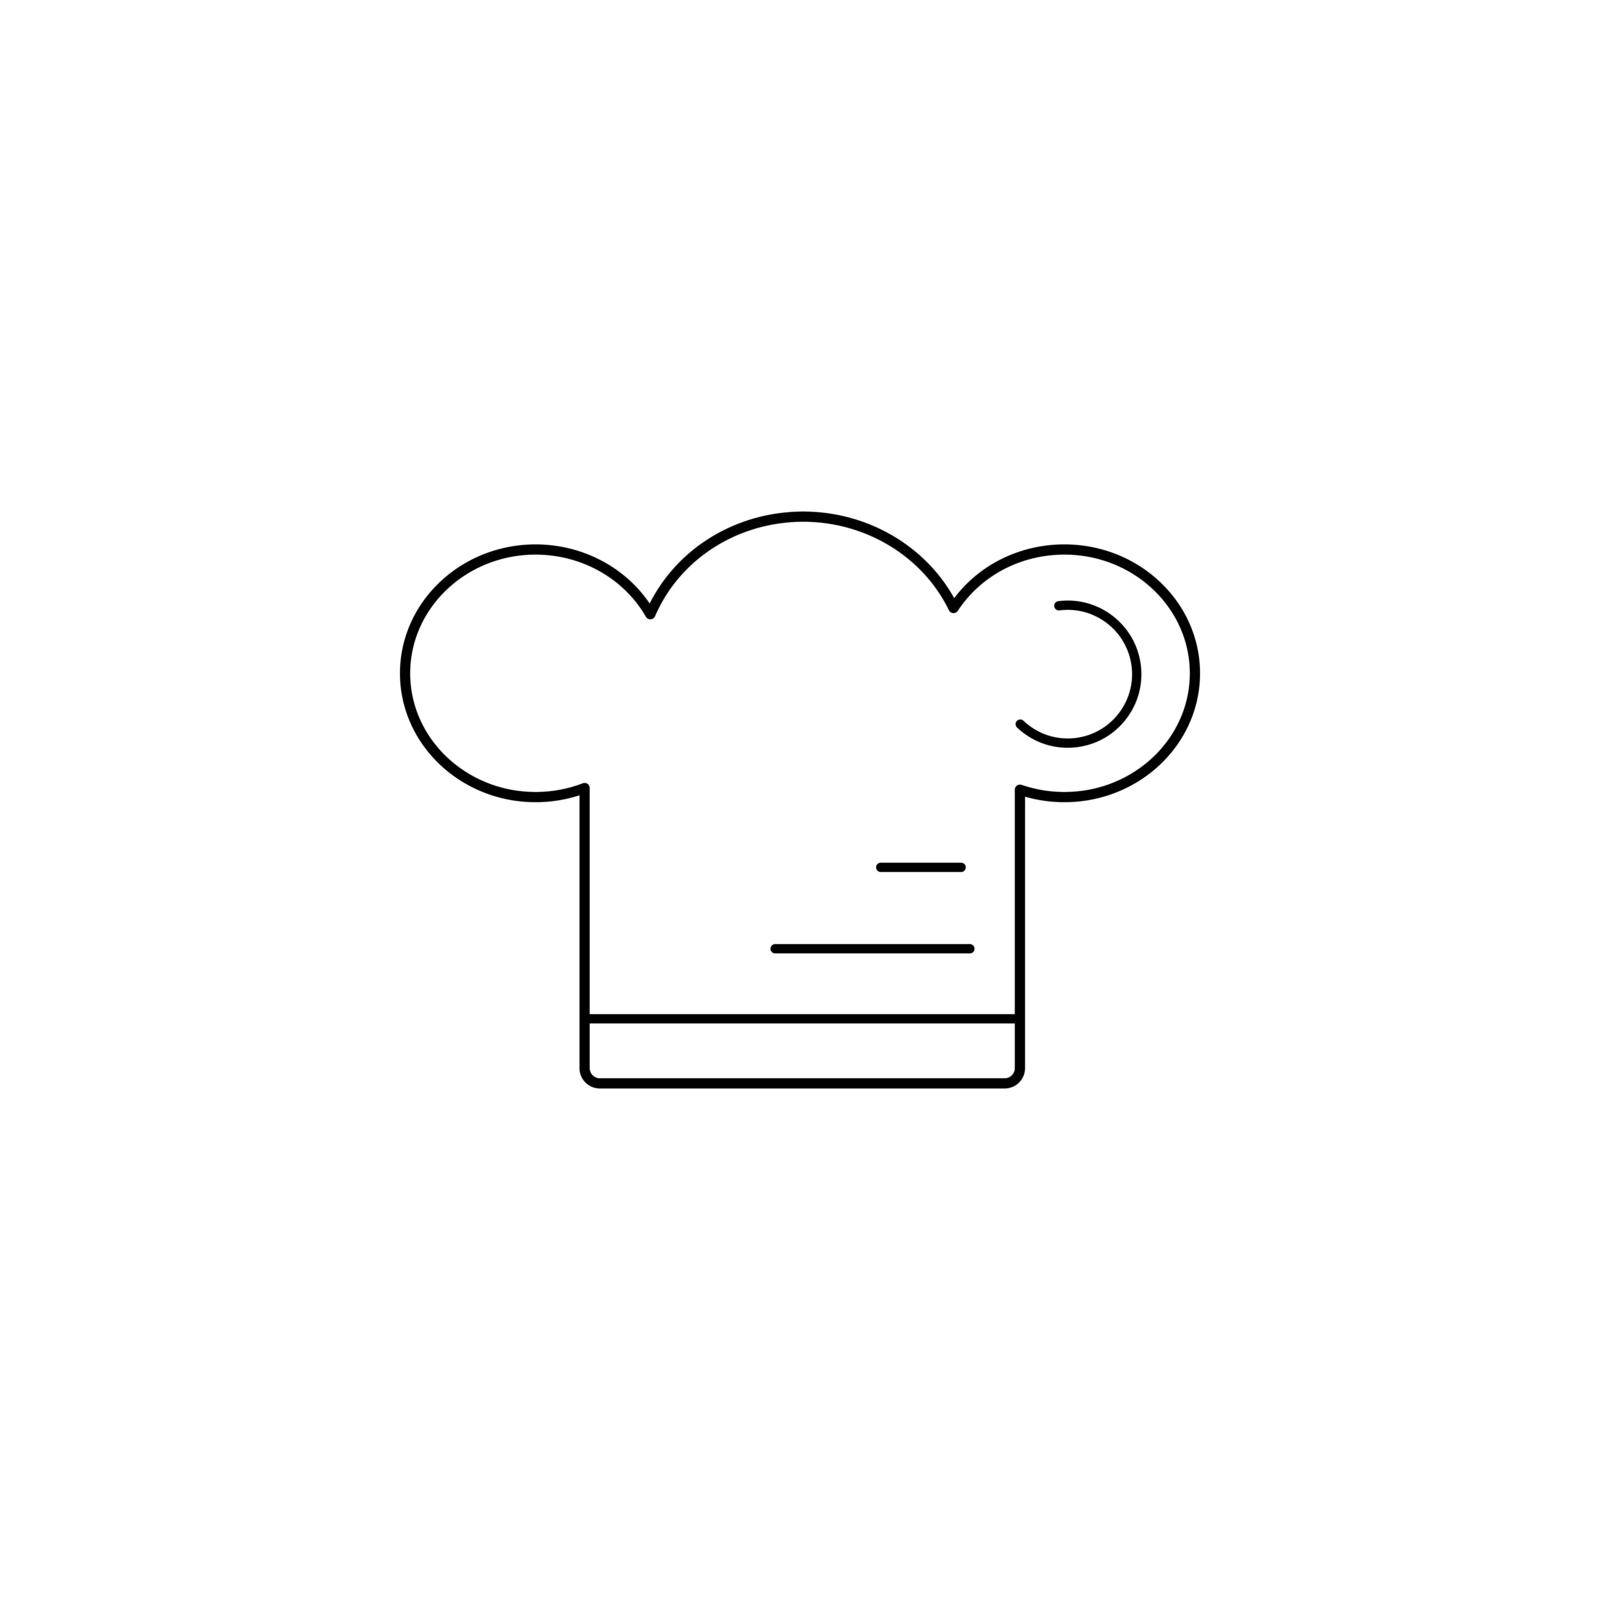 Chefs hat line icon. Simple black outline kitchen chef cap isolated vector. Accessory chef restaurant logo. Web element kitchen and cooking